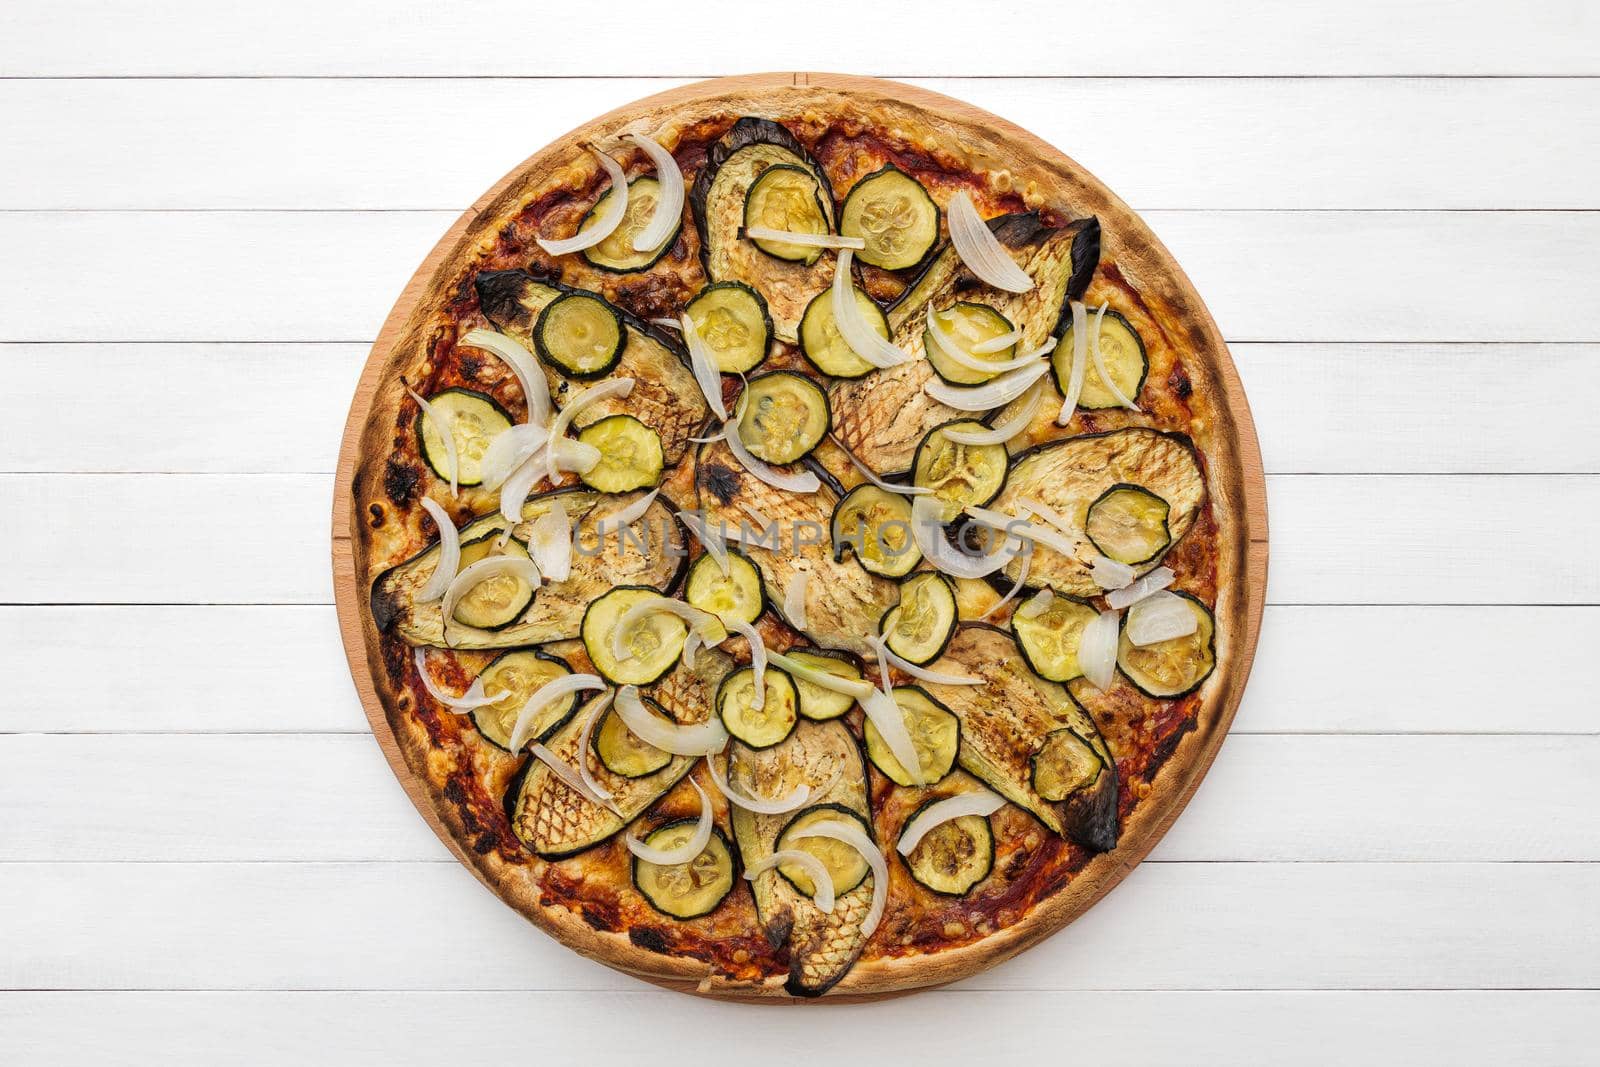 Whole vegetarian pizza topped with grilled eggplant, zucchini and onion, on wooden plate. Top view on white board background by apavlin